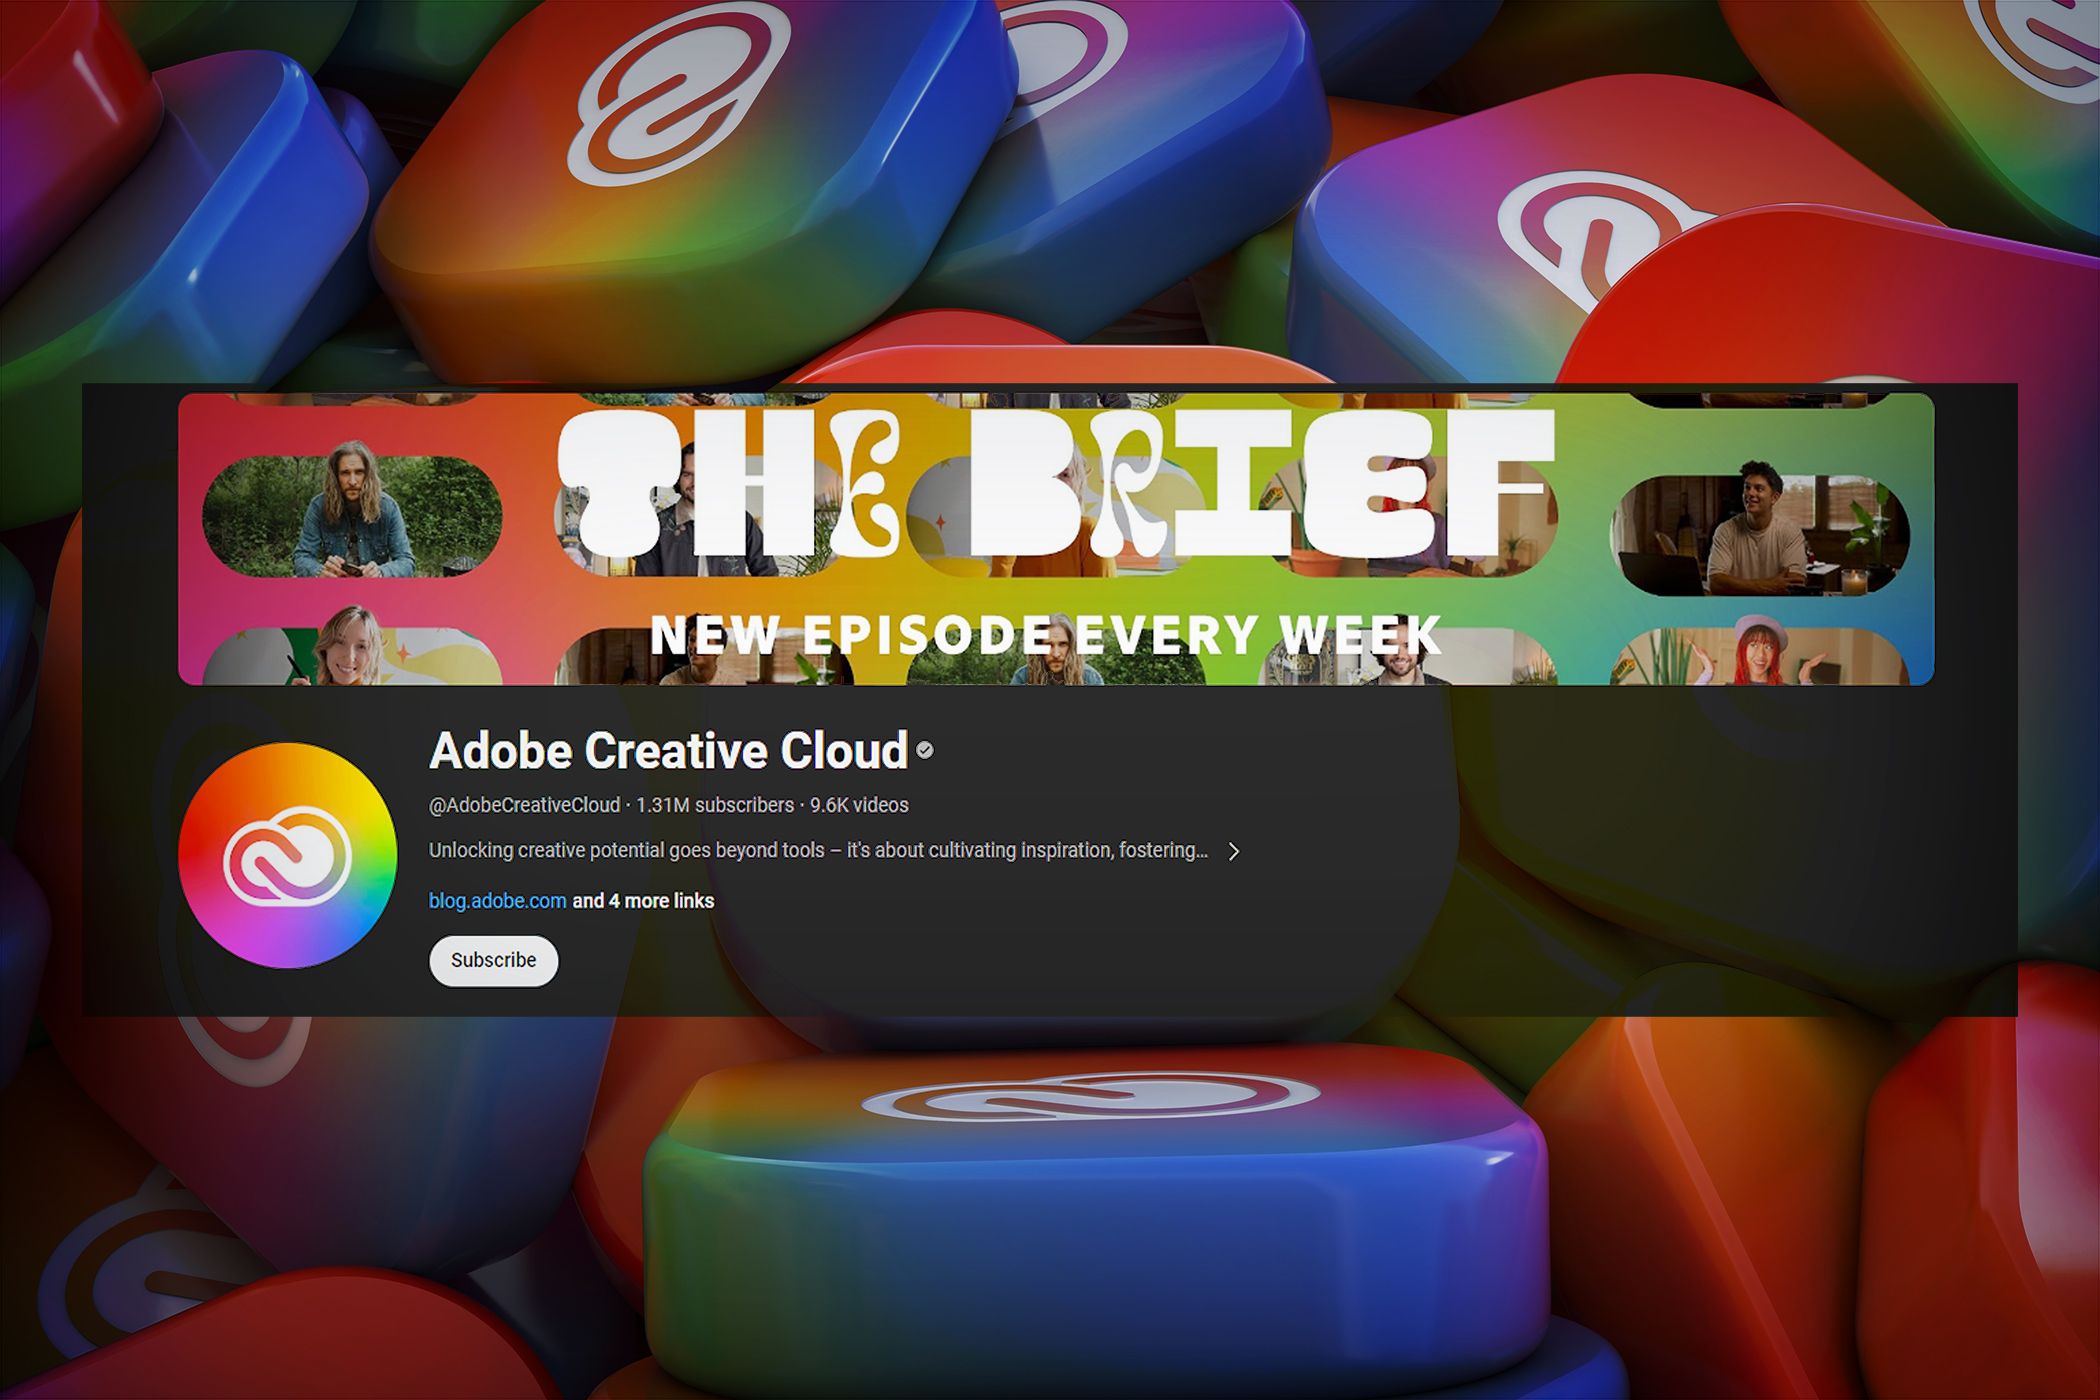 Adobe Creative Cloud's Youtube channel, promoting new weekly episodes, set against a colorful background of Adobe app icons.